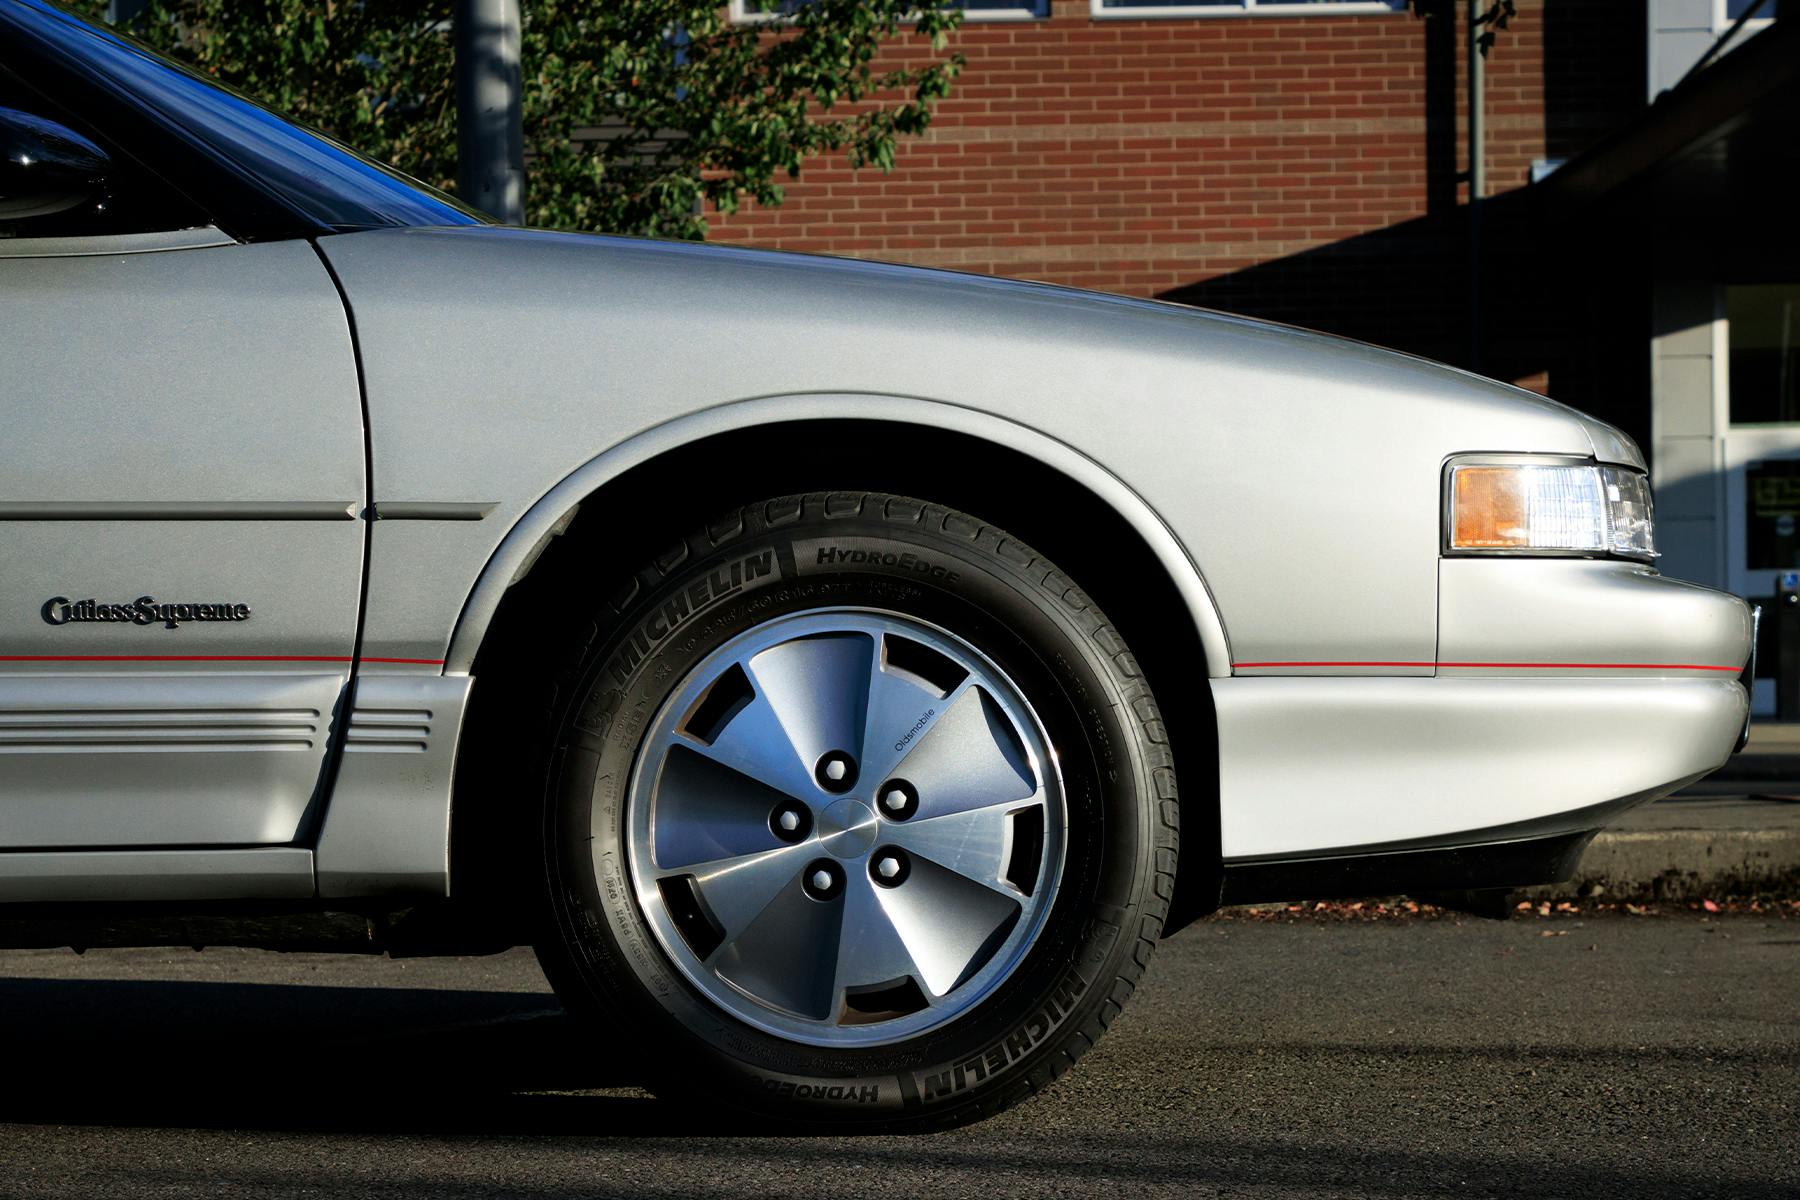 1991 Oldsmobile Cutlass Supreme Convertible front end side view